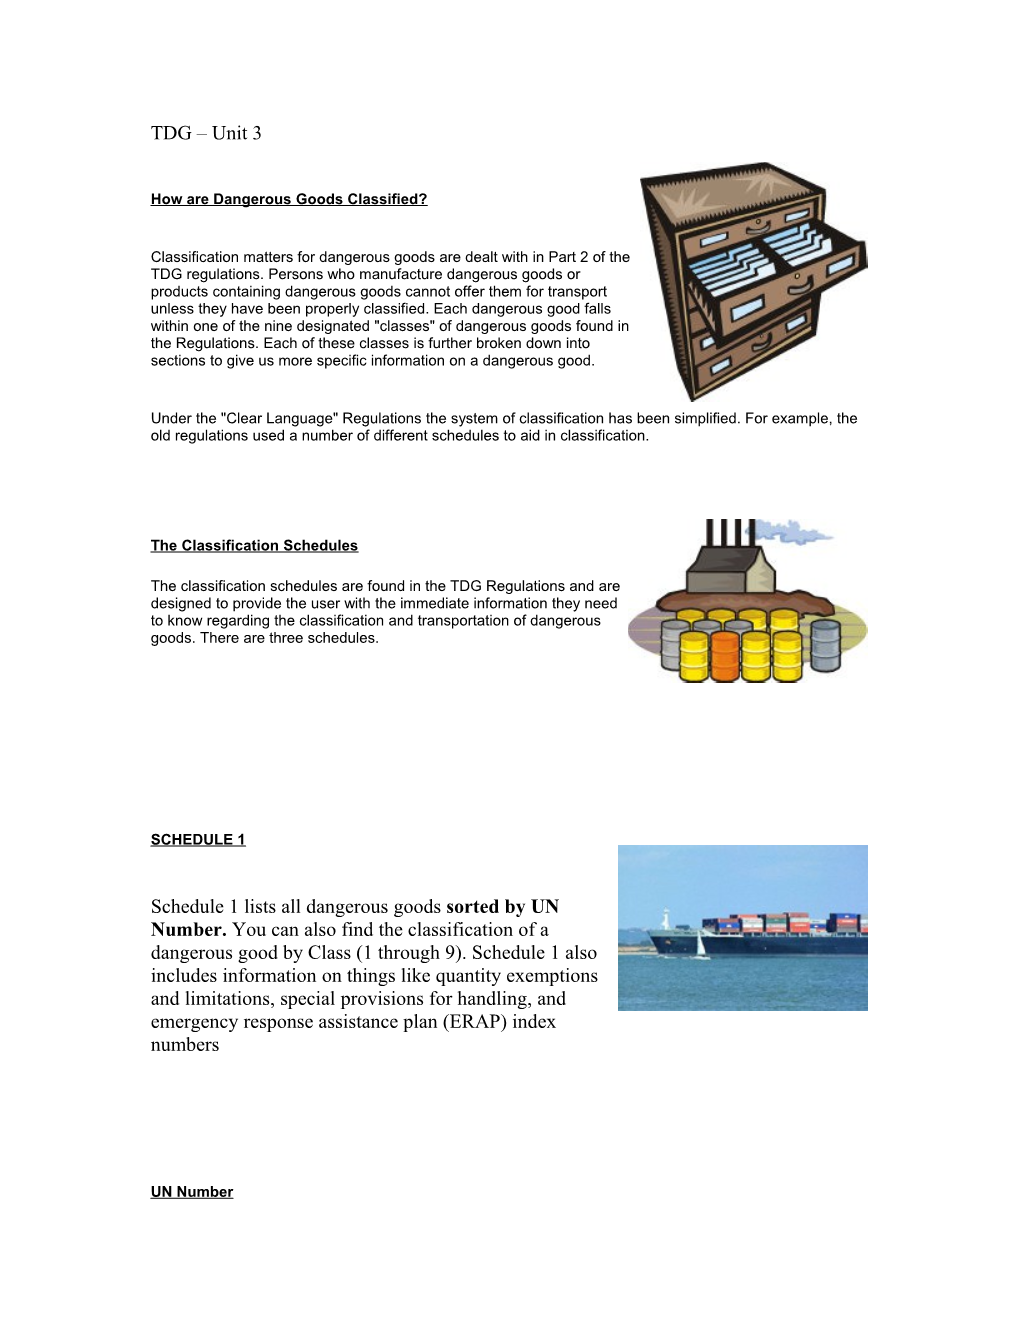 How Are Dangerous Goods Classified?